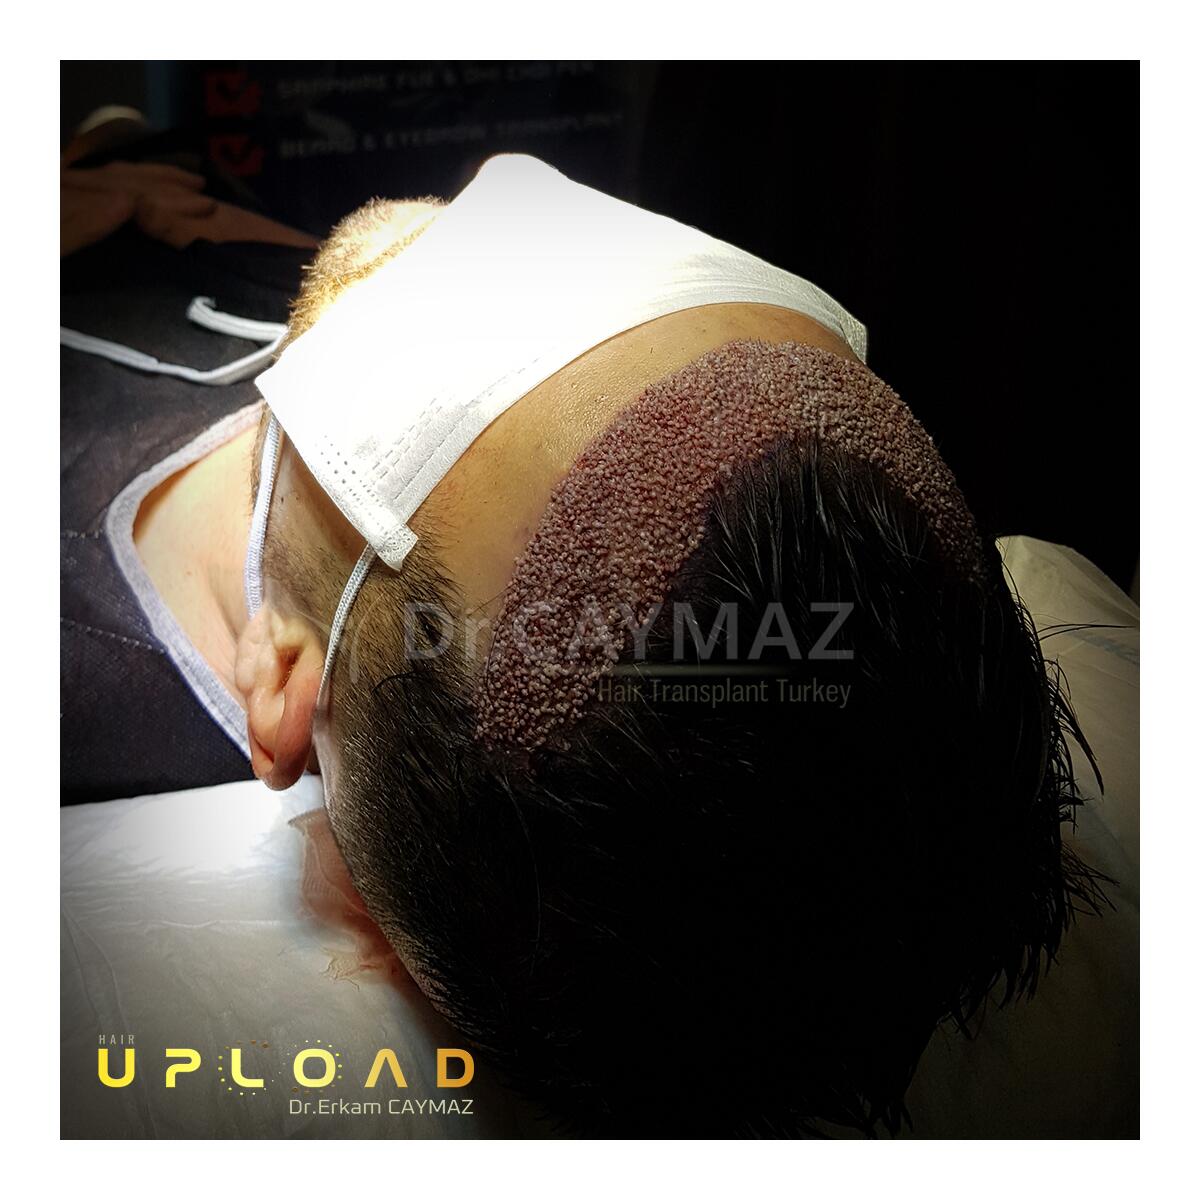 Hair Upload Clinic - Hair Transplant Turkey Istanbul Reviews Best Cost | Sapphire FUE DHI & Dr.Erkam 5 star review on 14th January 2020